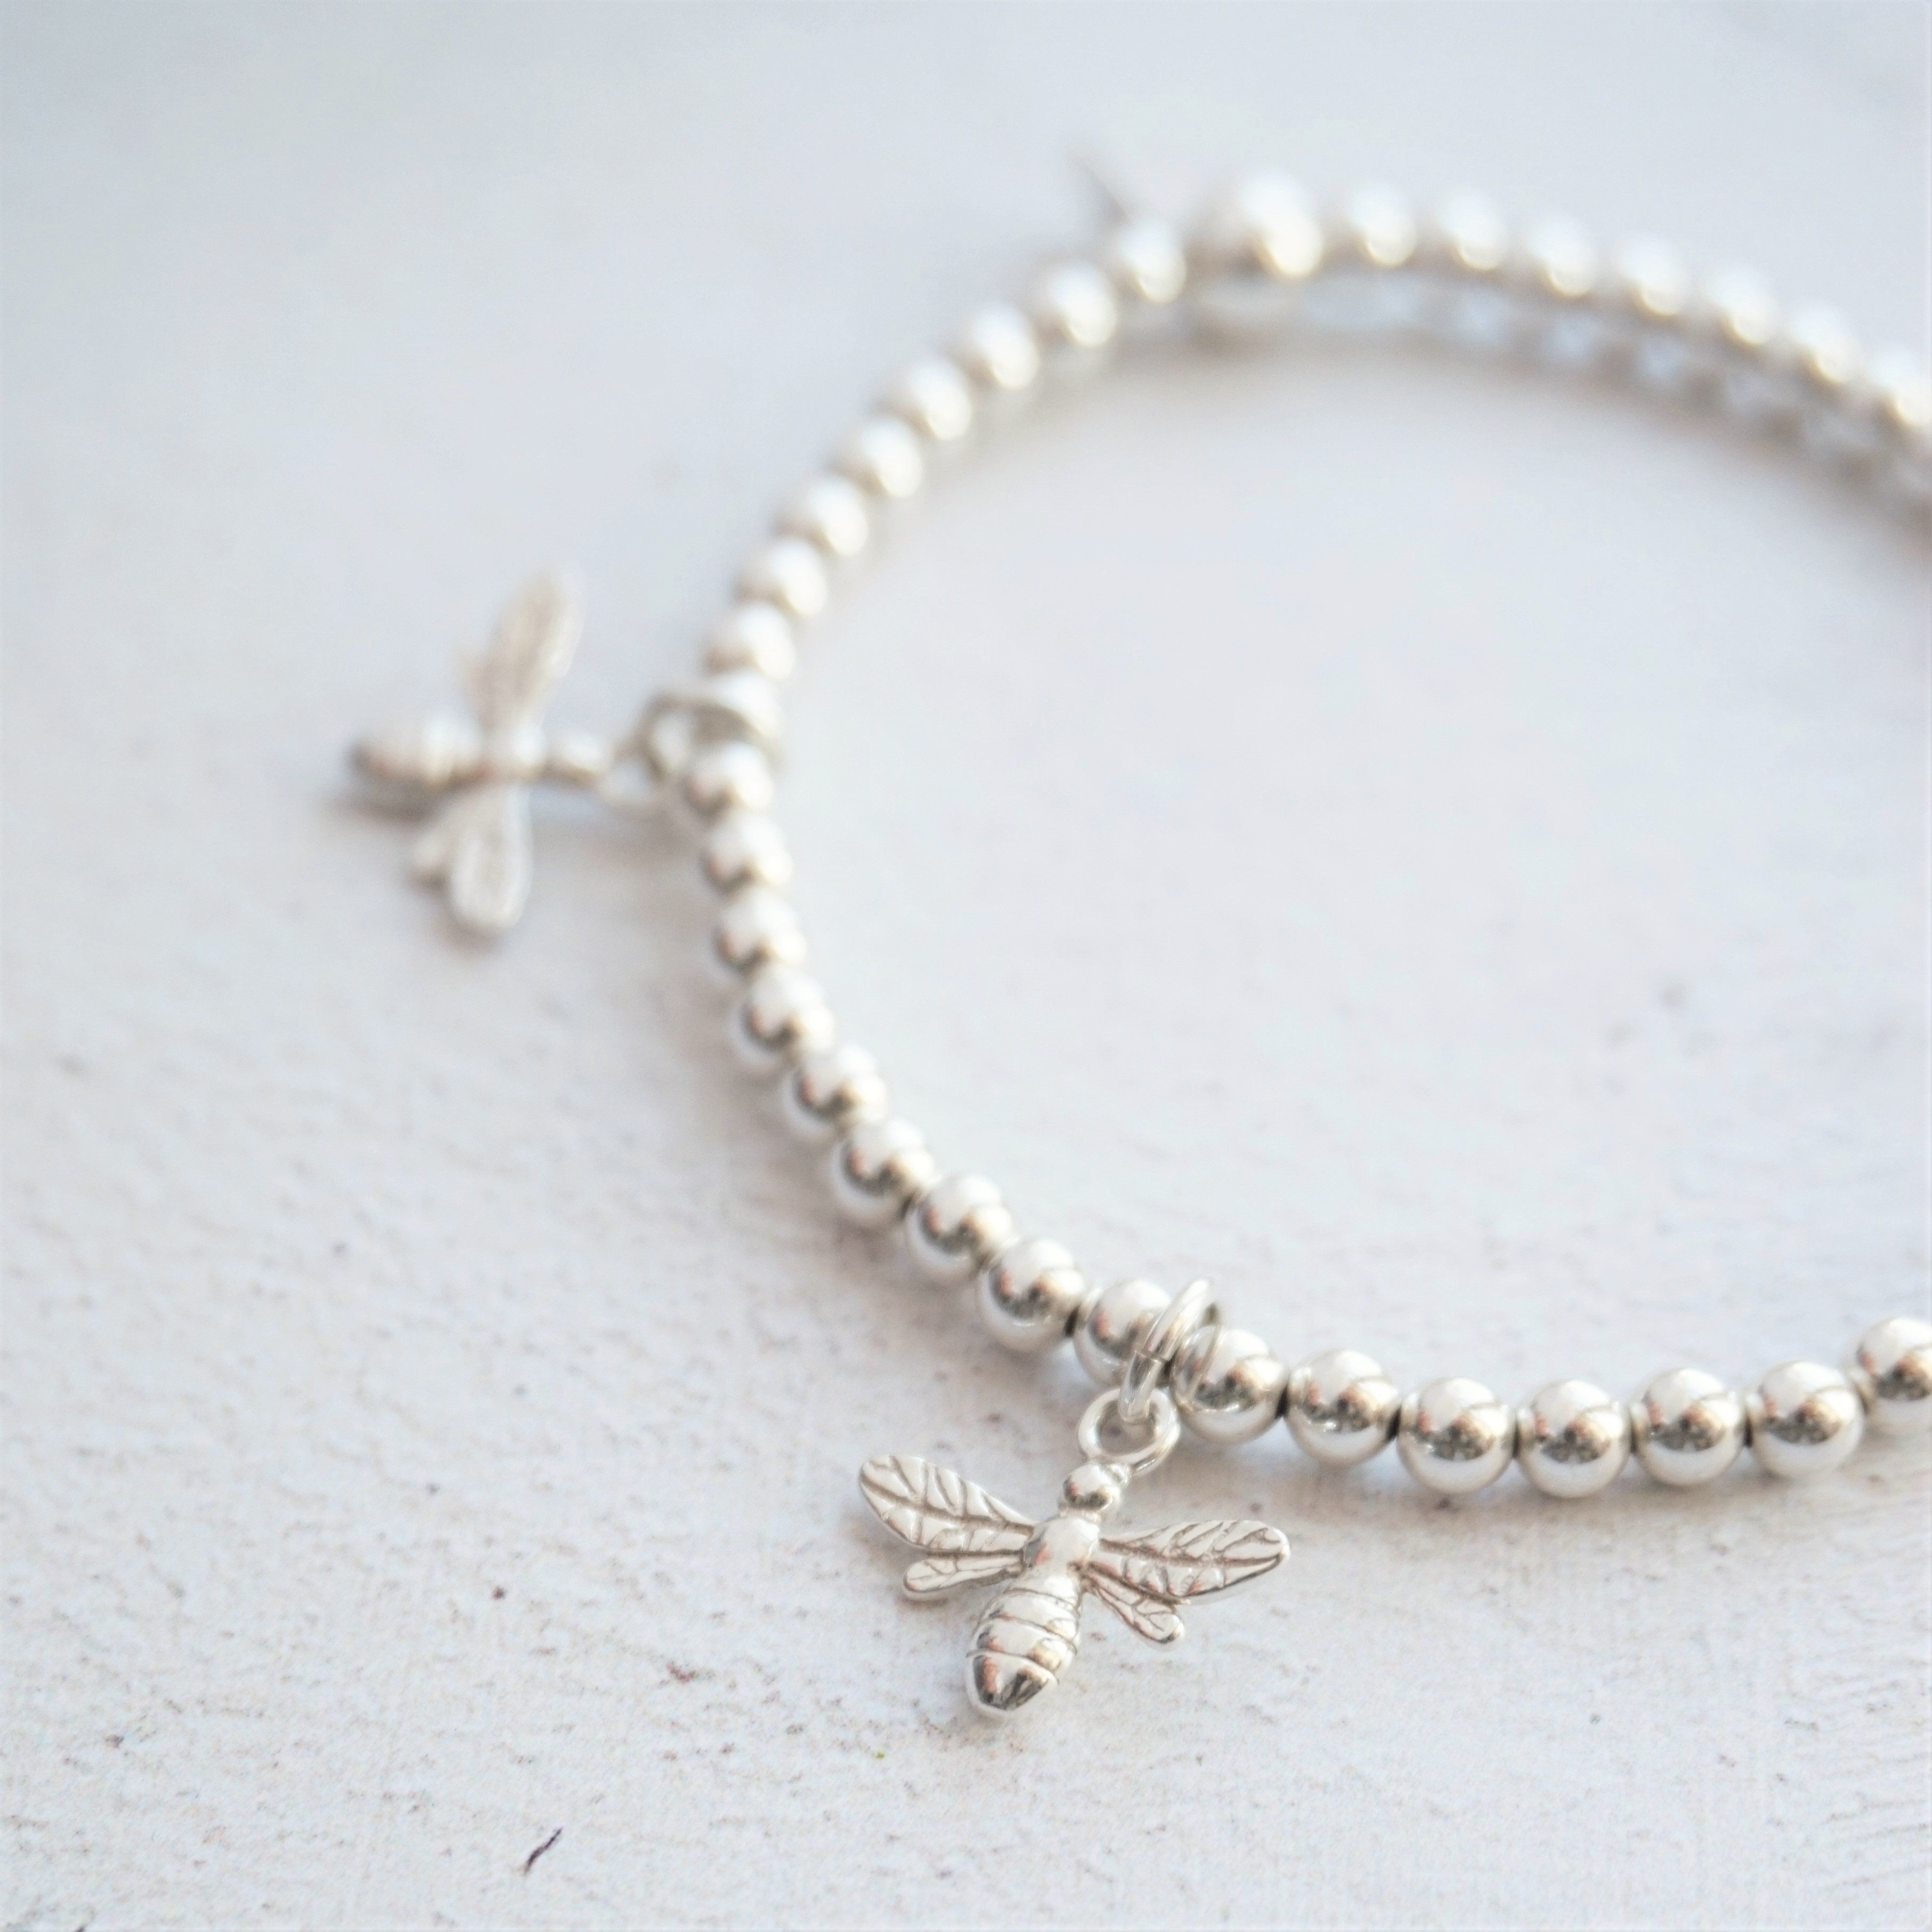 sterling silver bracelet with bumble bee charms